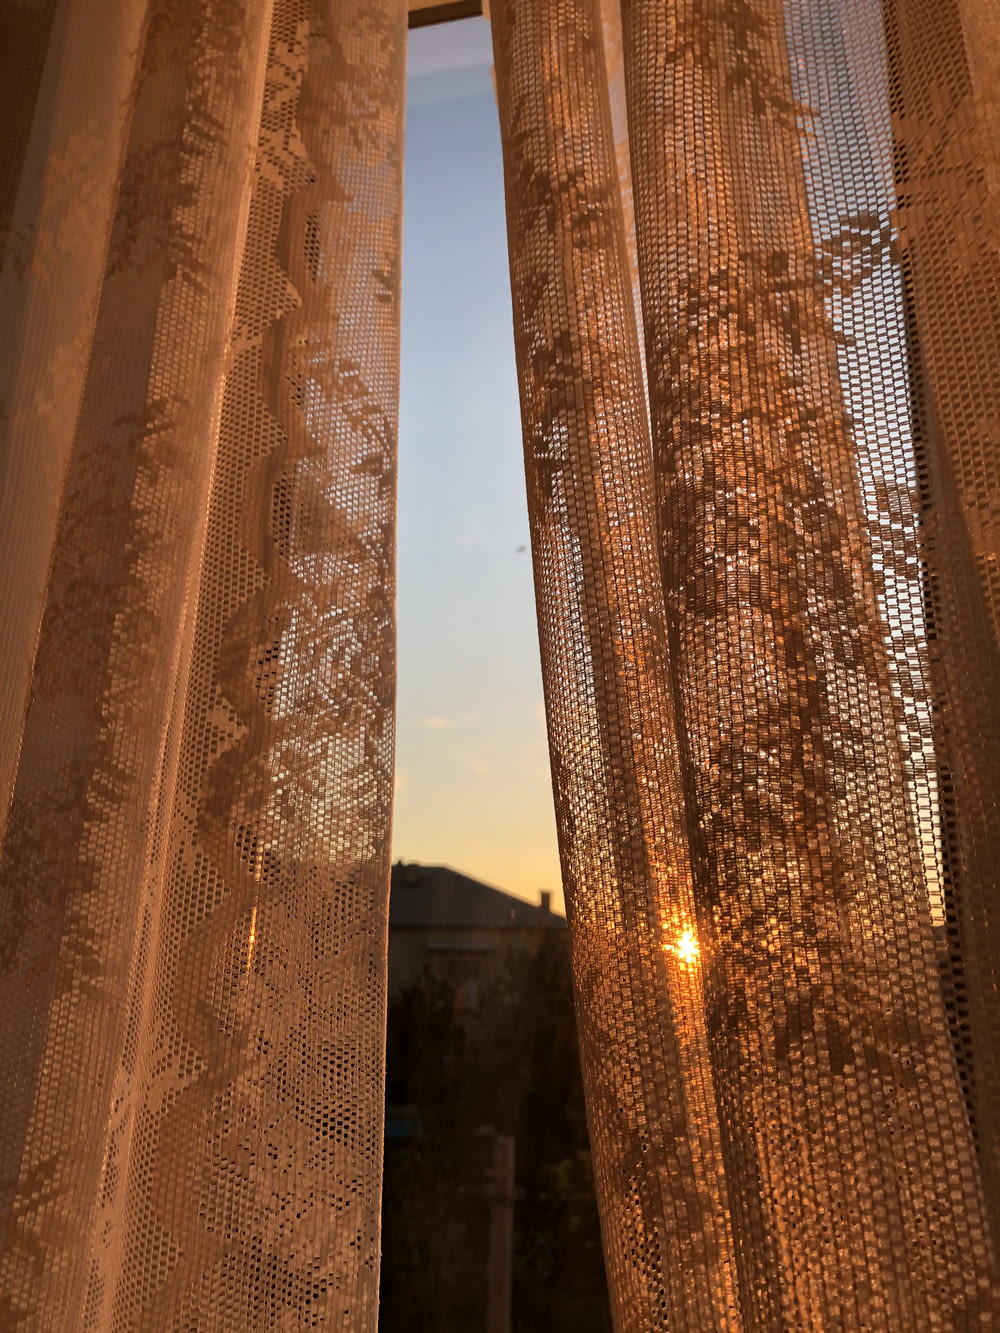 brown floral curtain during sunset